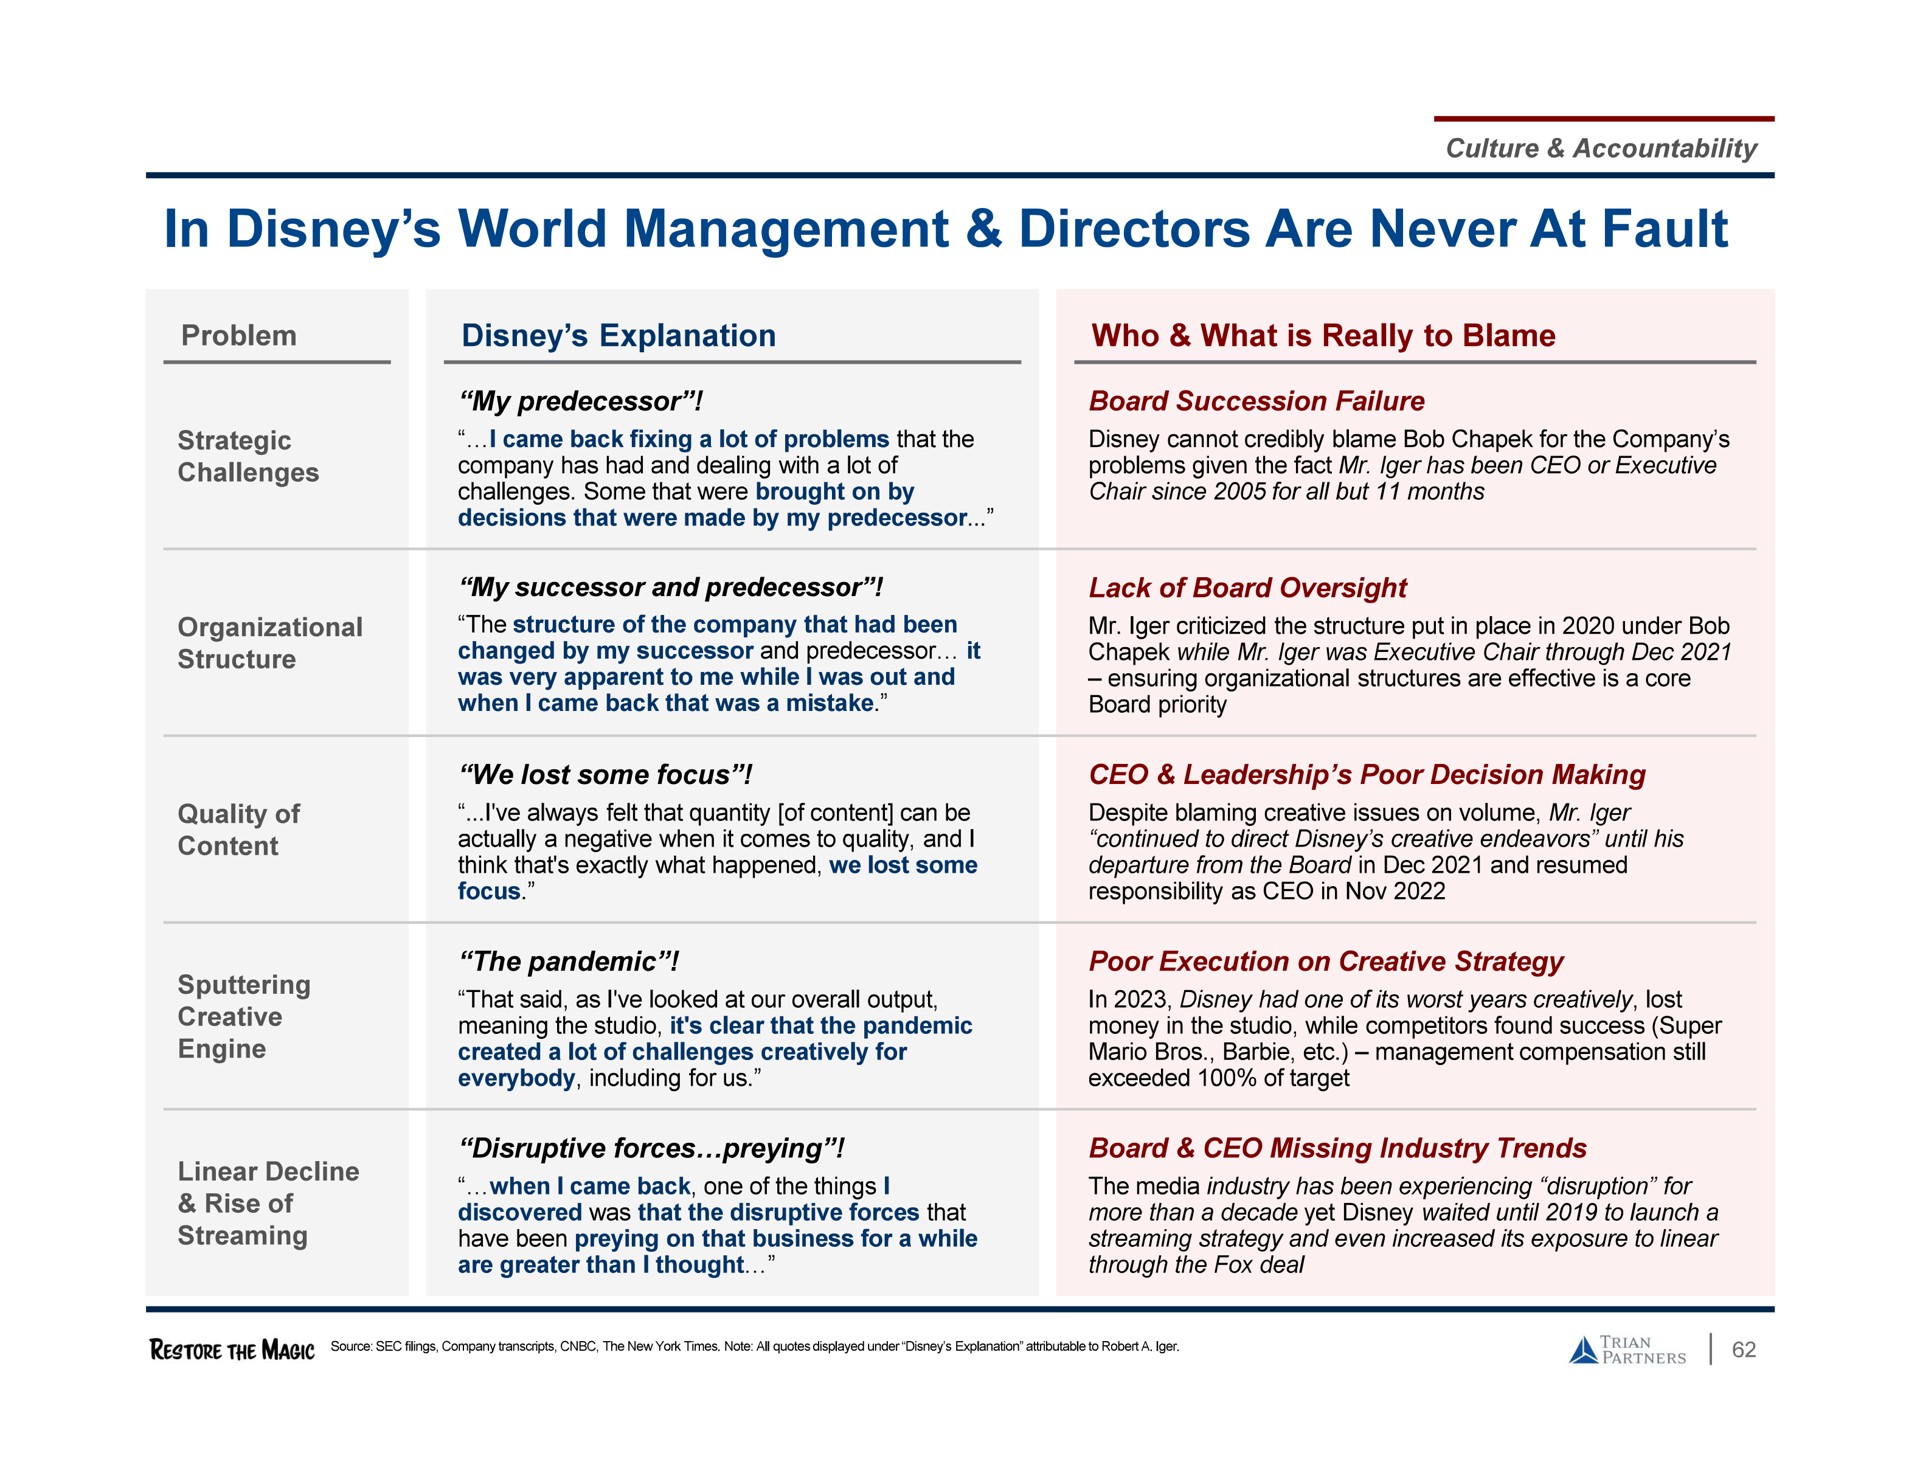 in world management directors are never at fault | Trian Partners